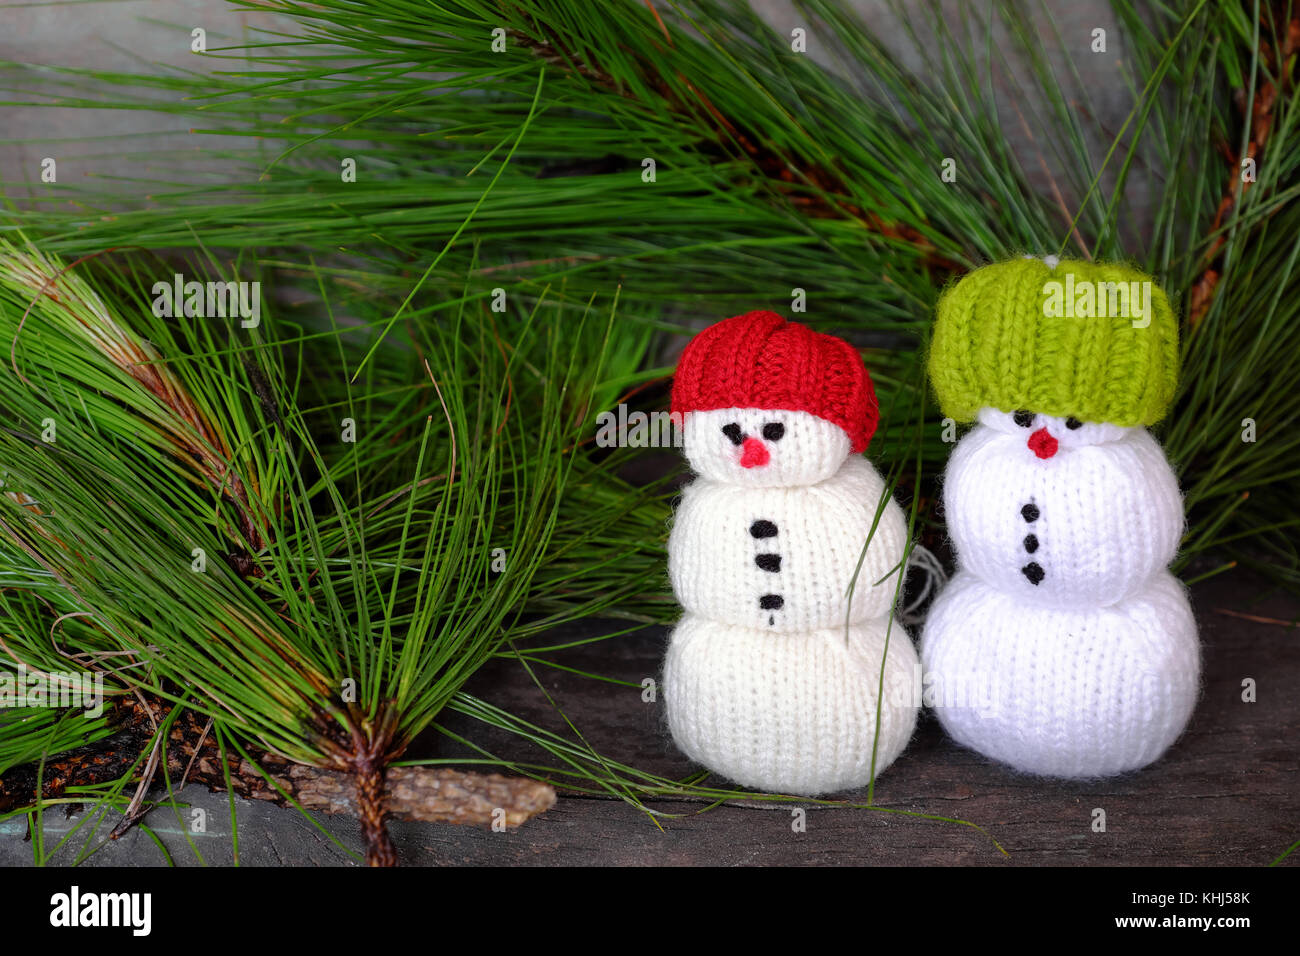 two Christmas snowman from knitted toy standing front of pine Stock Photo